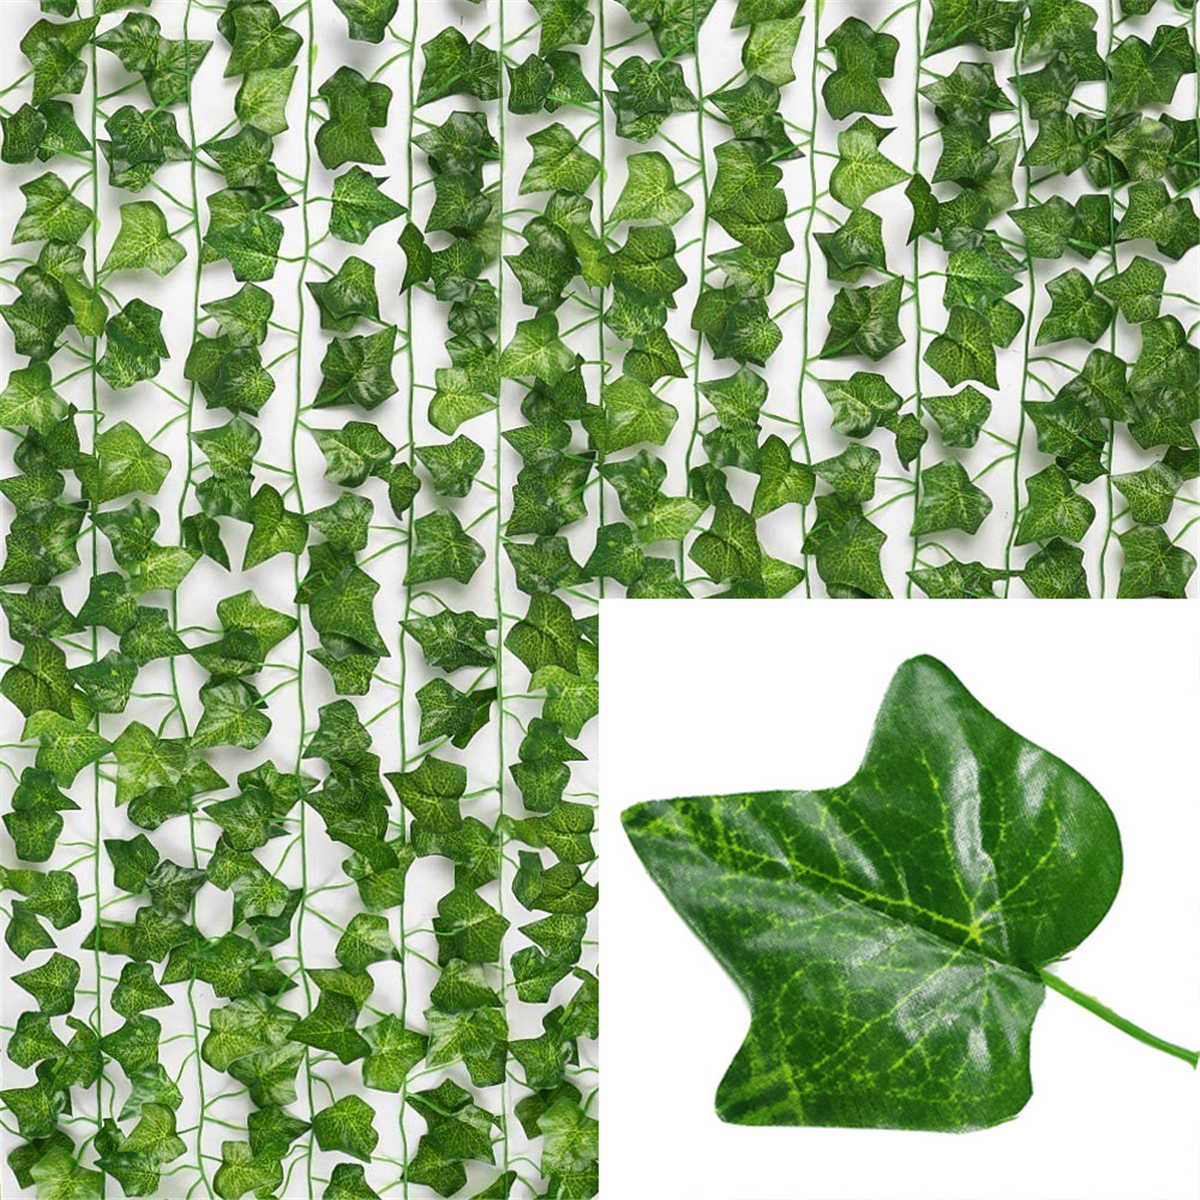 SilkTouch Decorative Vines Artificial Green Leaf Wreaths For Wall Hanging,  Home Garden And Weddings. From Wuliannanya, $17.48